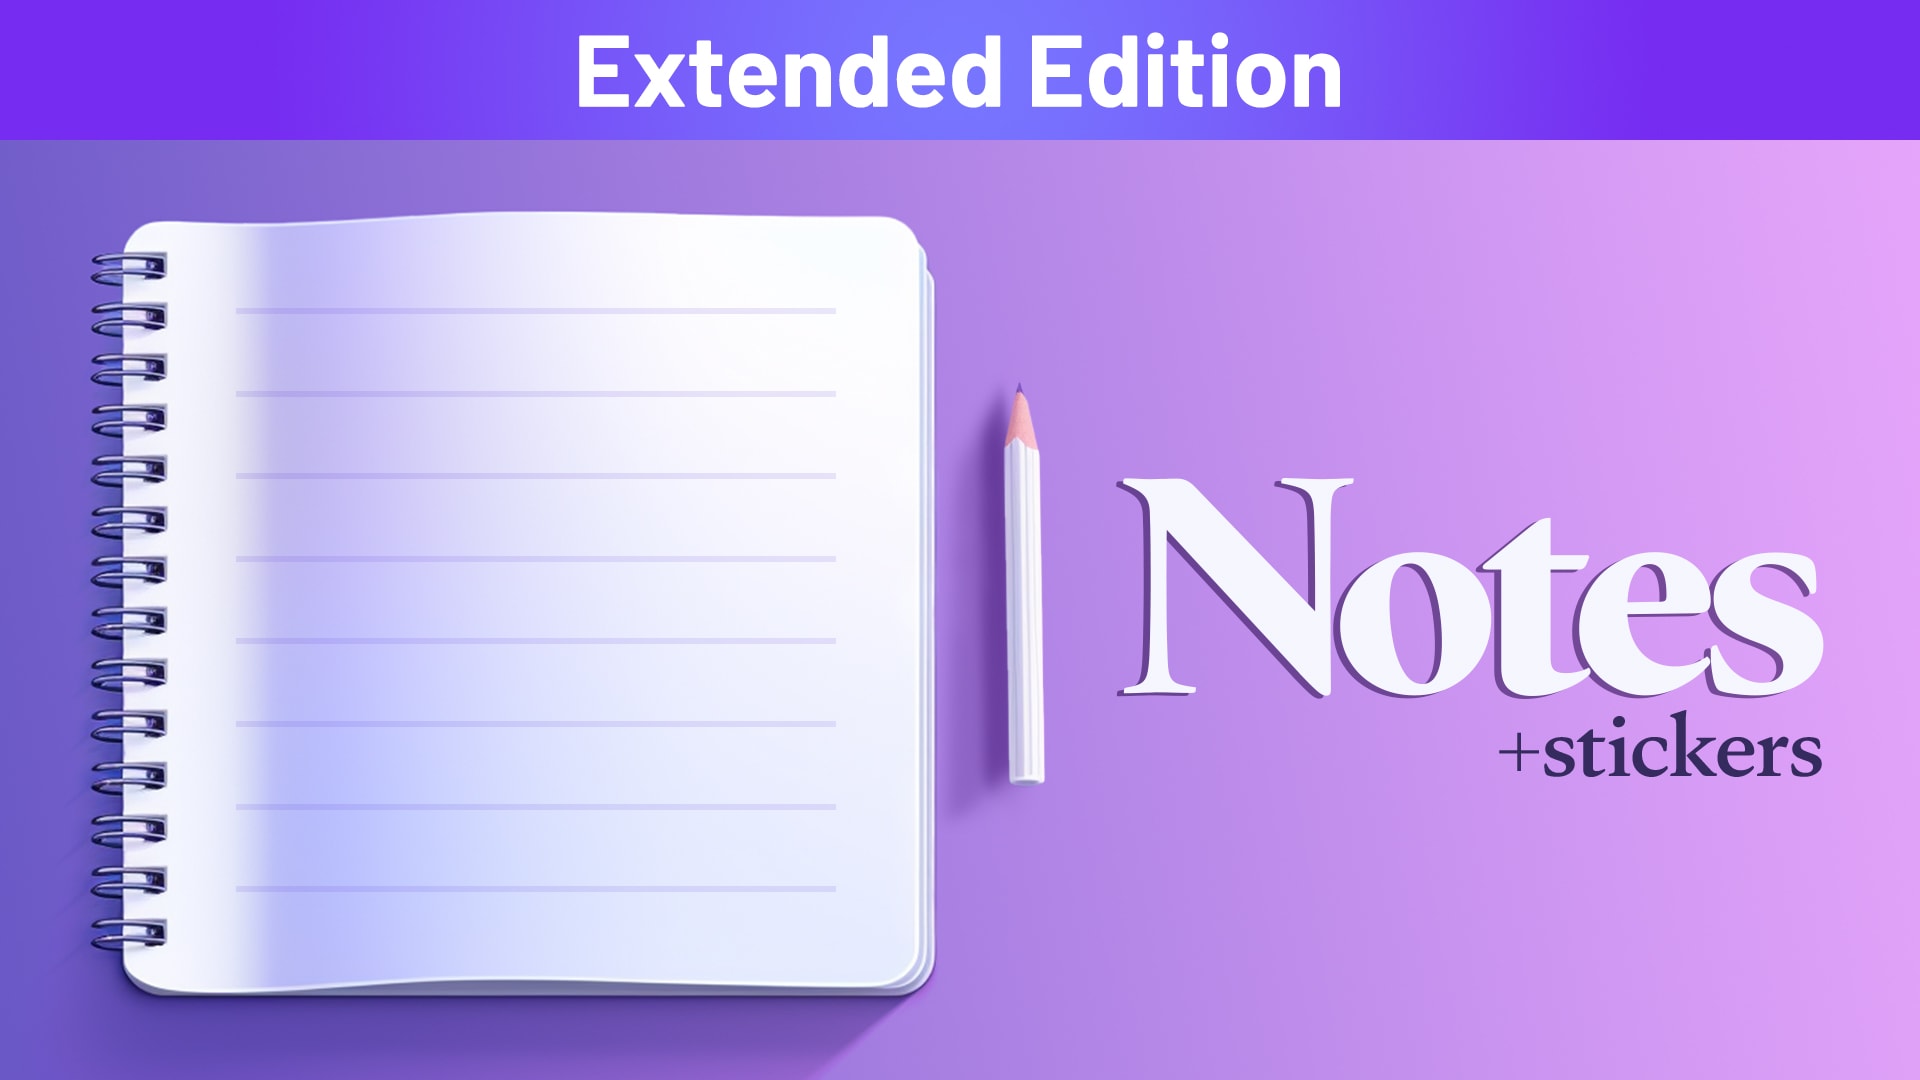 Notes + Stickers Extended Edition